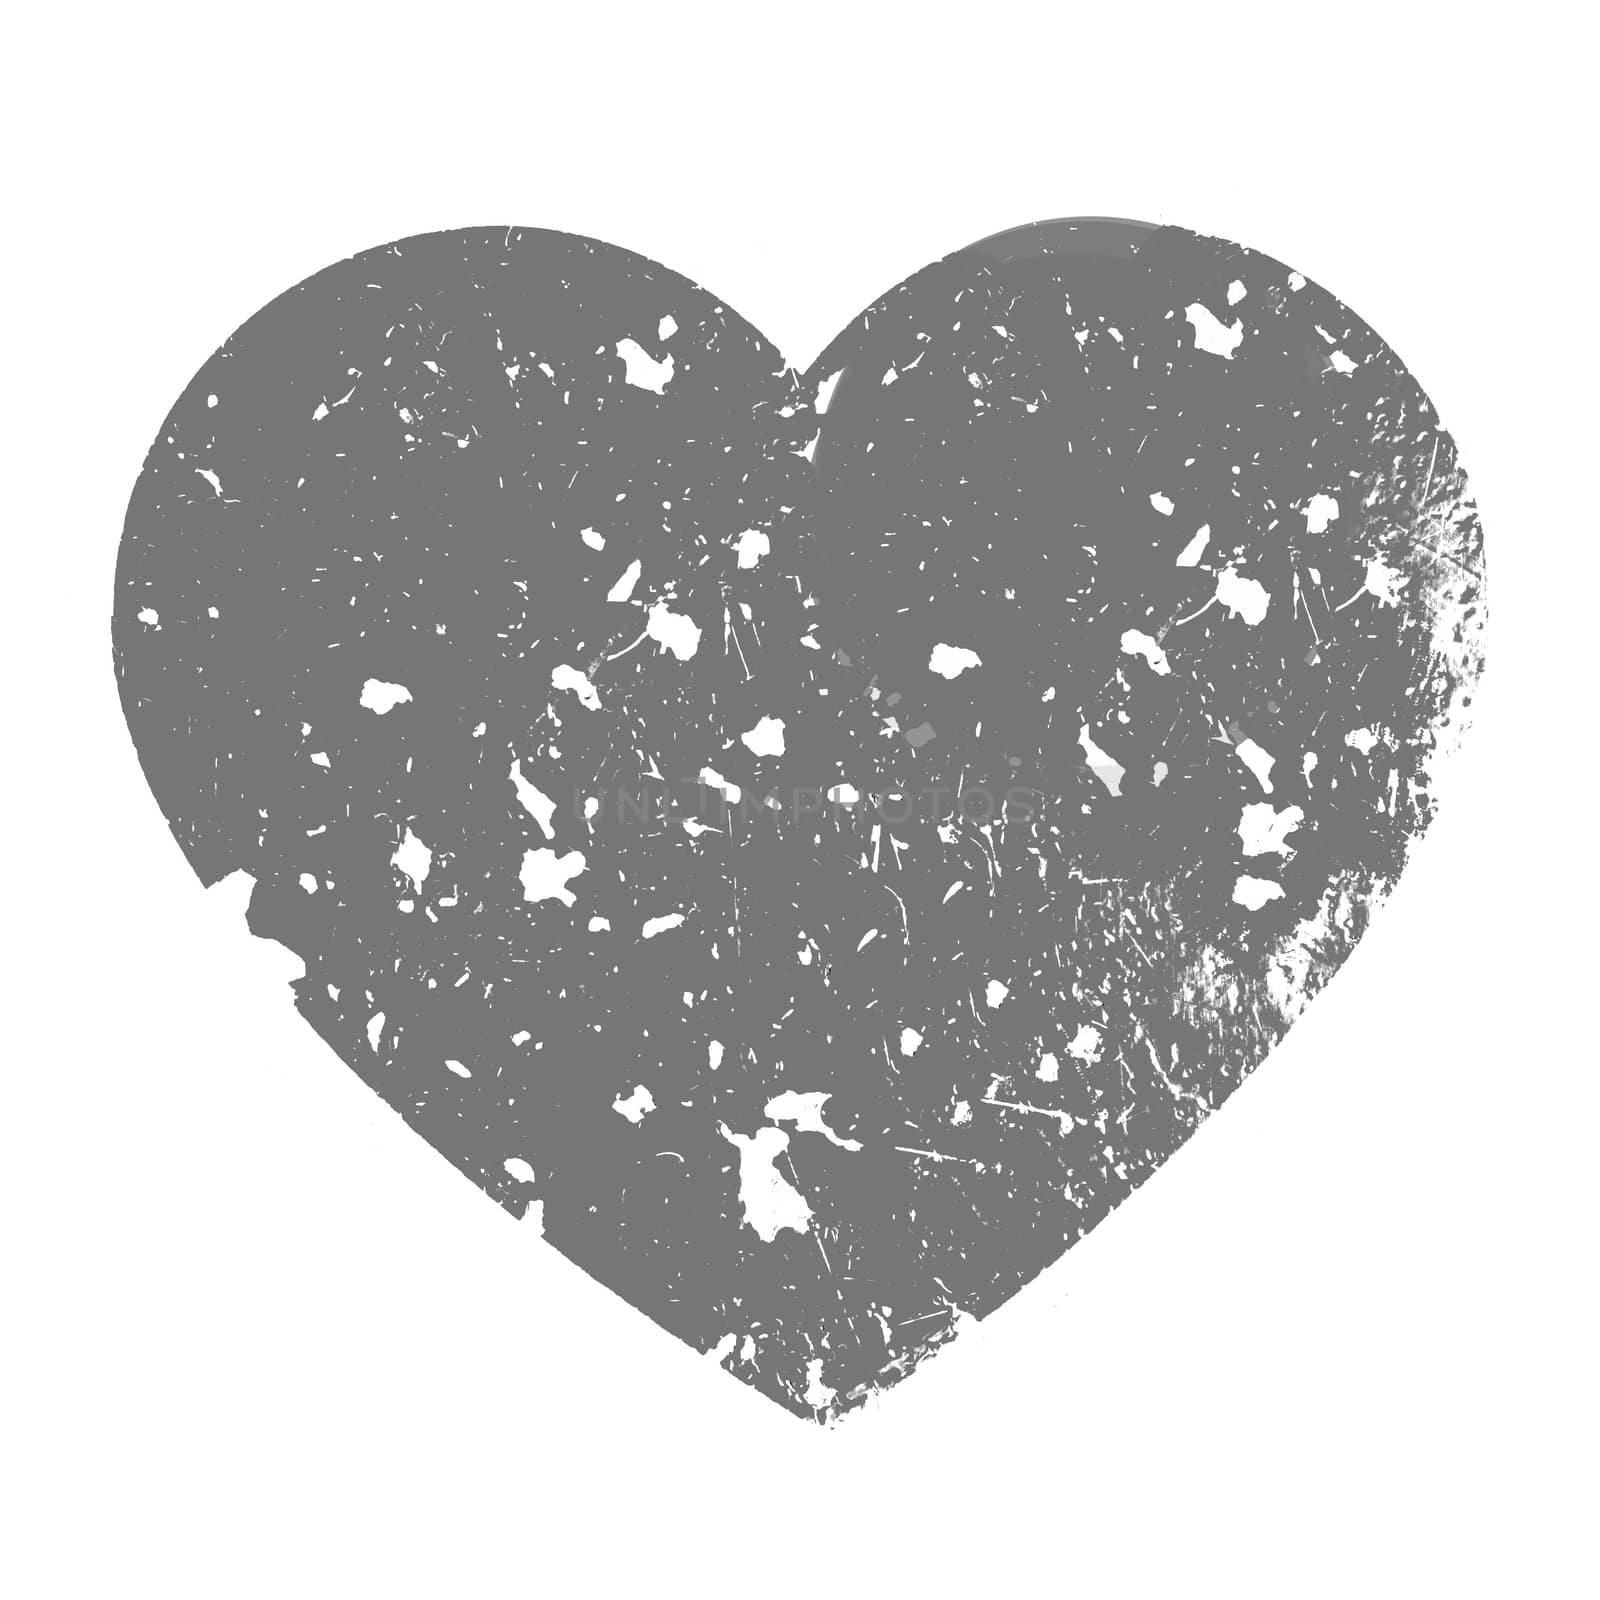 Conceptual broken heart shape on white background. Love and romantic symbol in Valentine's Day background.